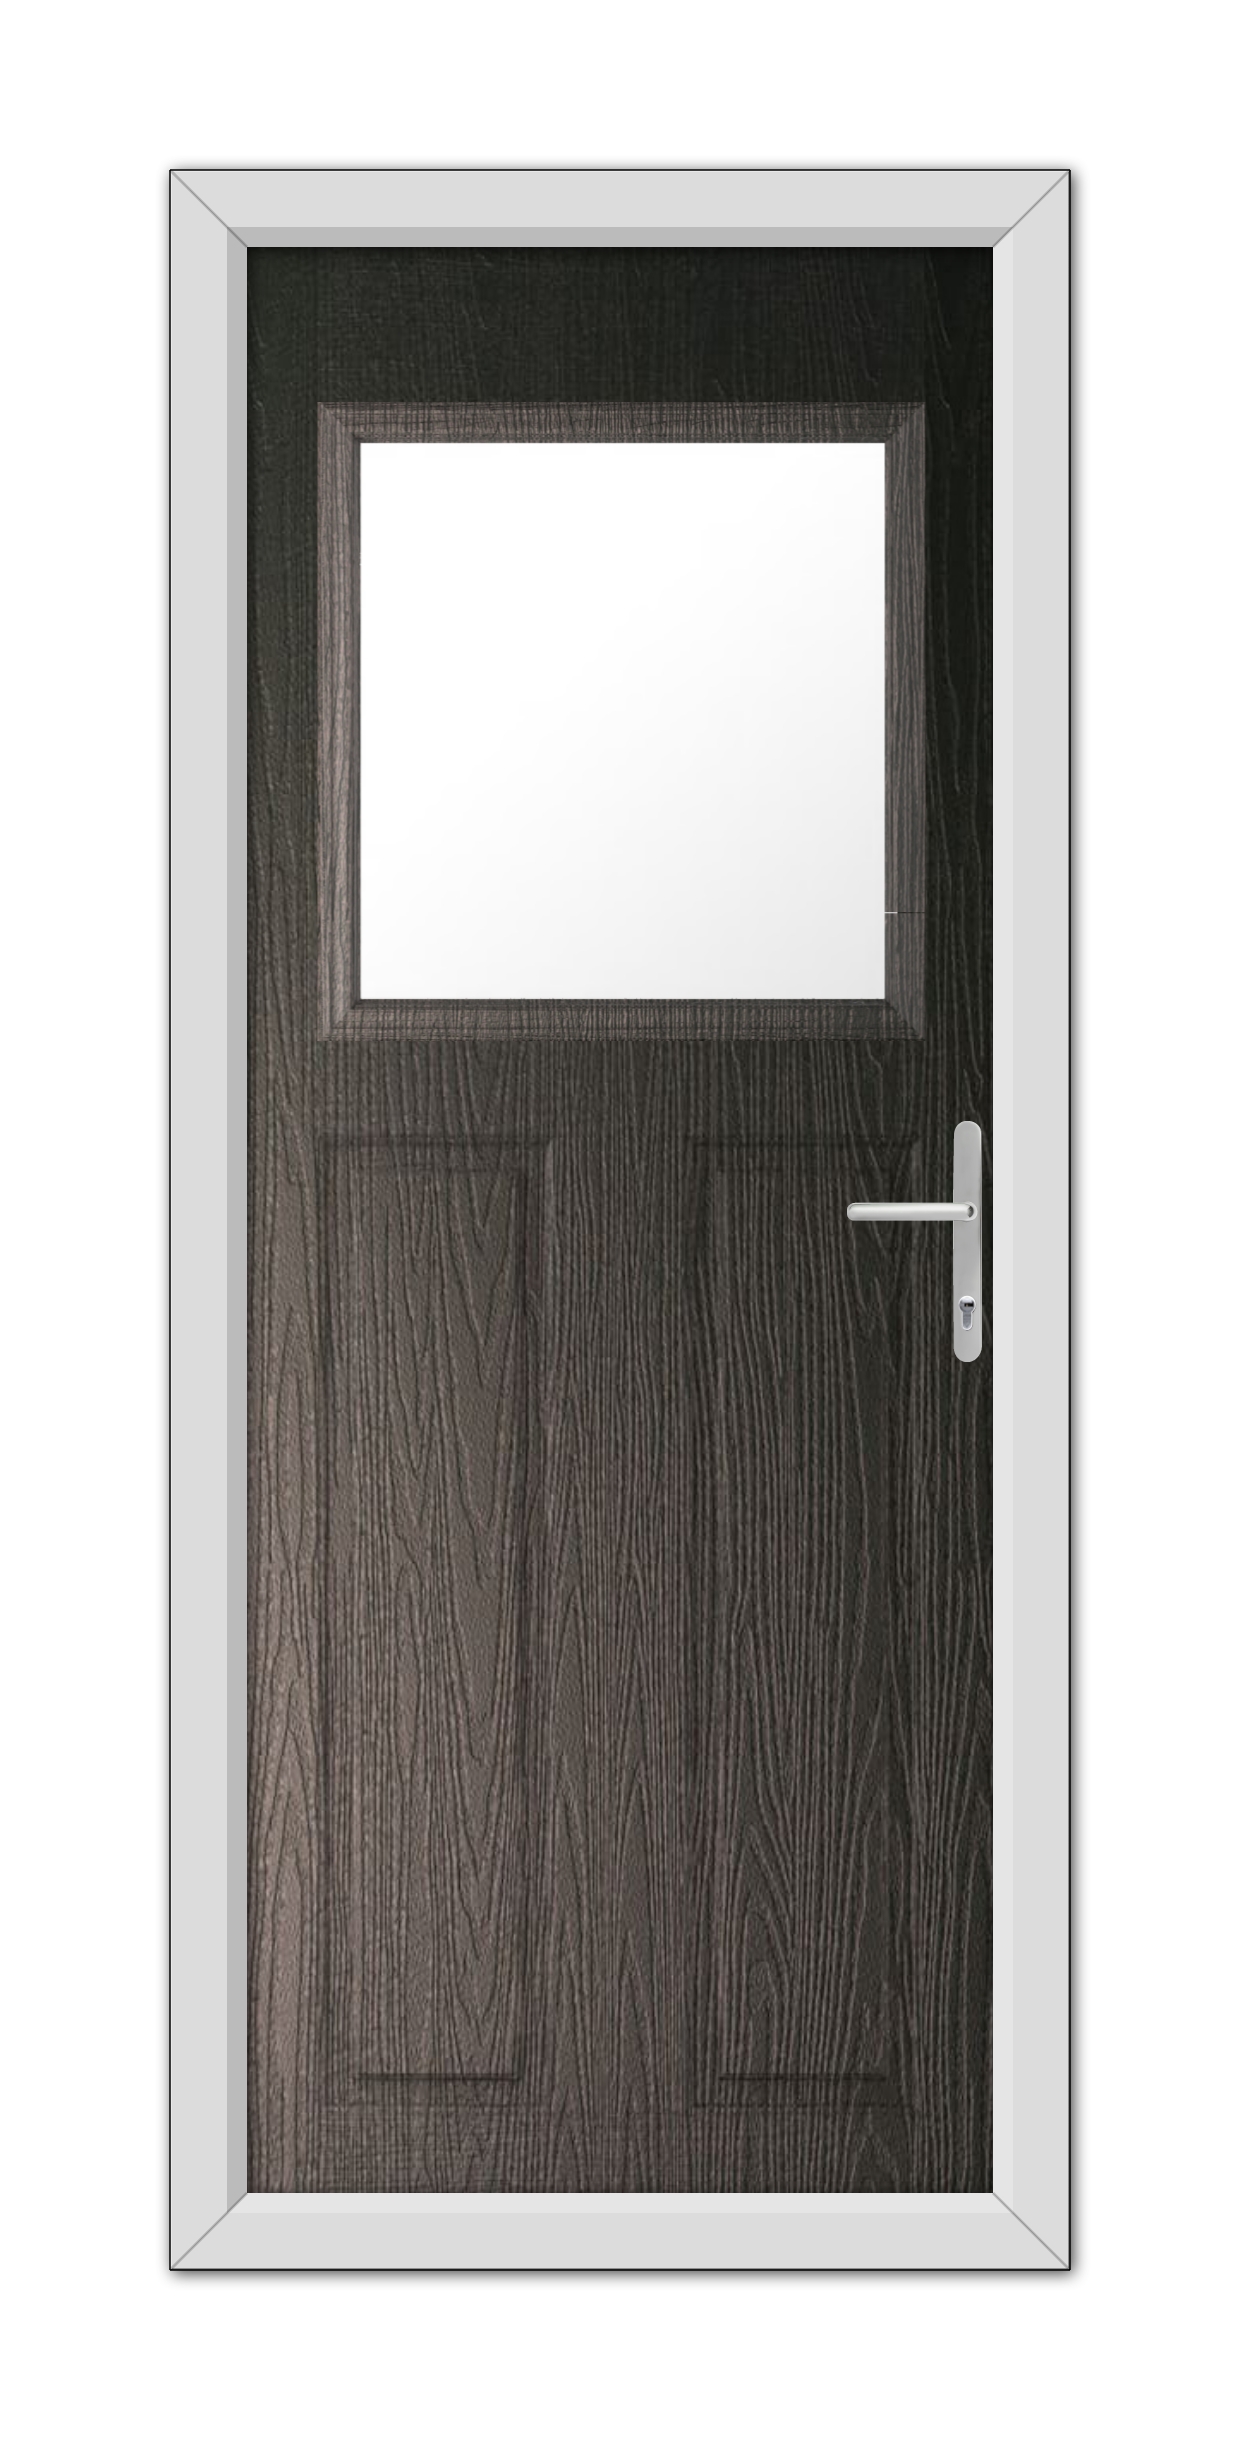 A modern Schwarzbraun Axwell Composite Door 48mm Timber Core with a small square window and silver handle, set within a light gray frame, isolated on a white background.